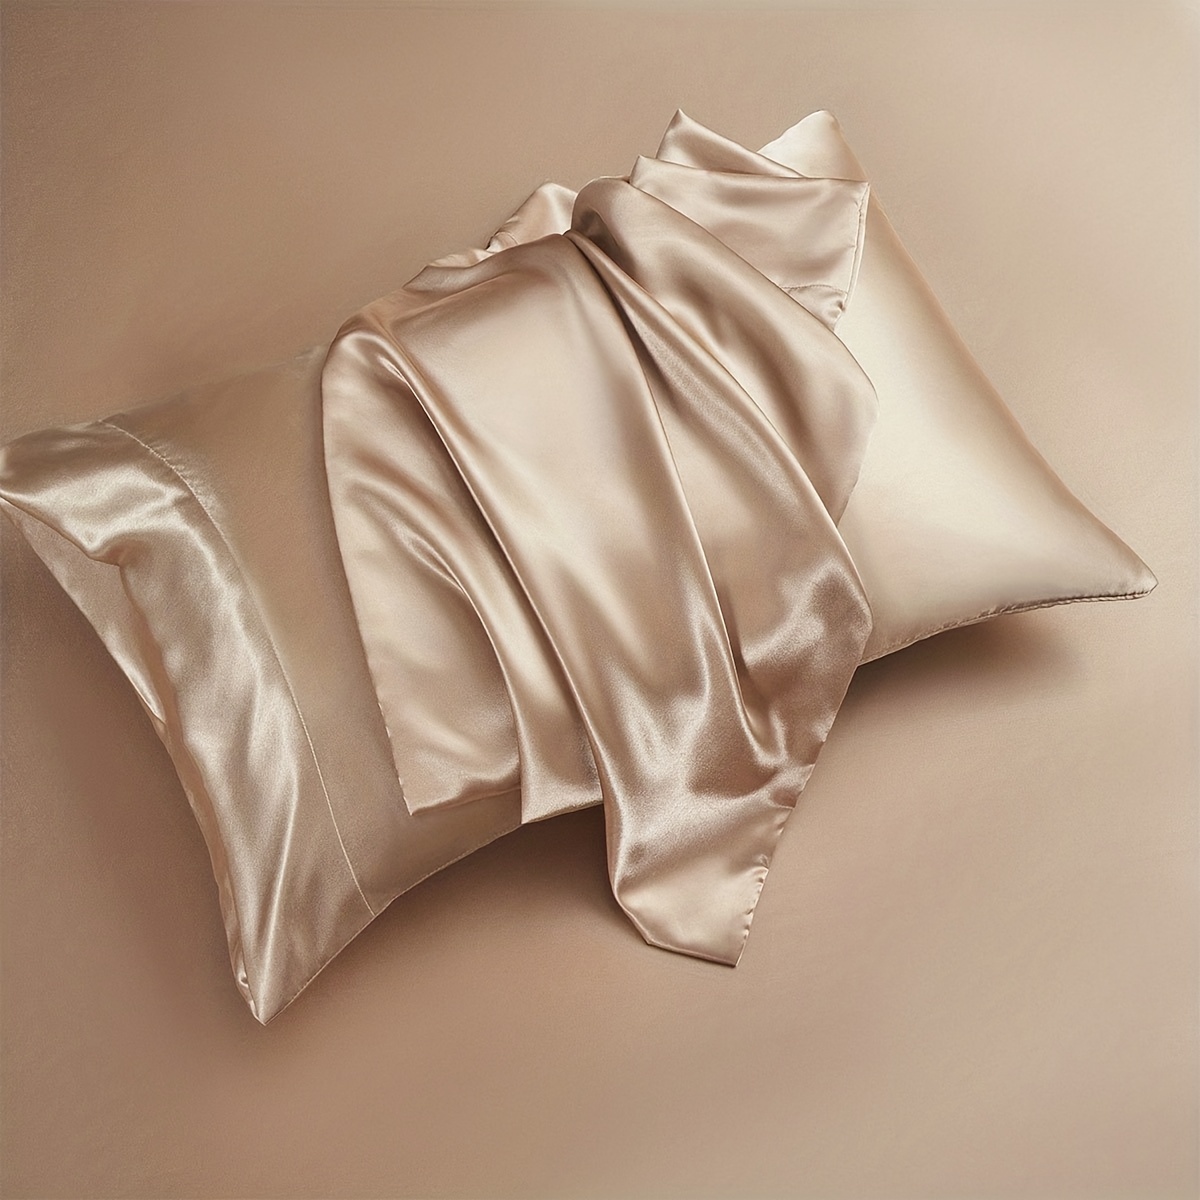 2pcs Satin Pillowcase, Solid Color Pillow Covers For Living Room Bedroom, No Pillow Insert